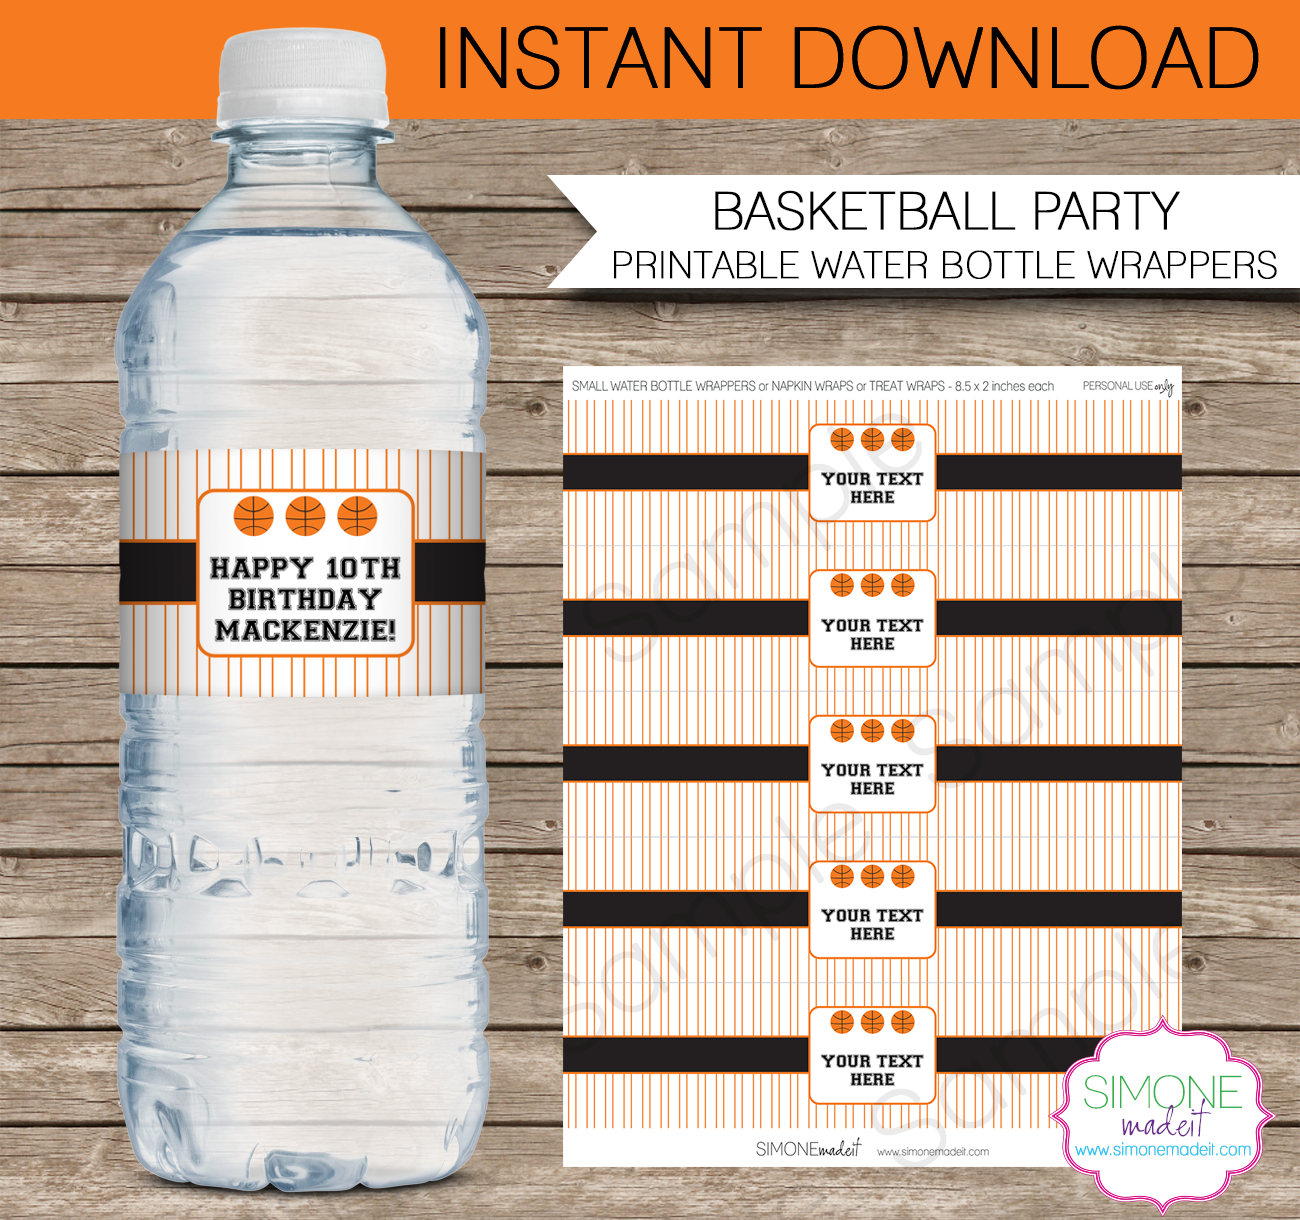 Printable Basketball Party Water Bottle Labels | Birthday Party | Editable DIY Template | $3.00 INSTANT DOWNLOAD via SIMONEmadeit.com